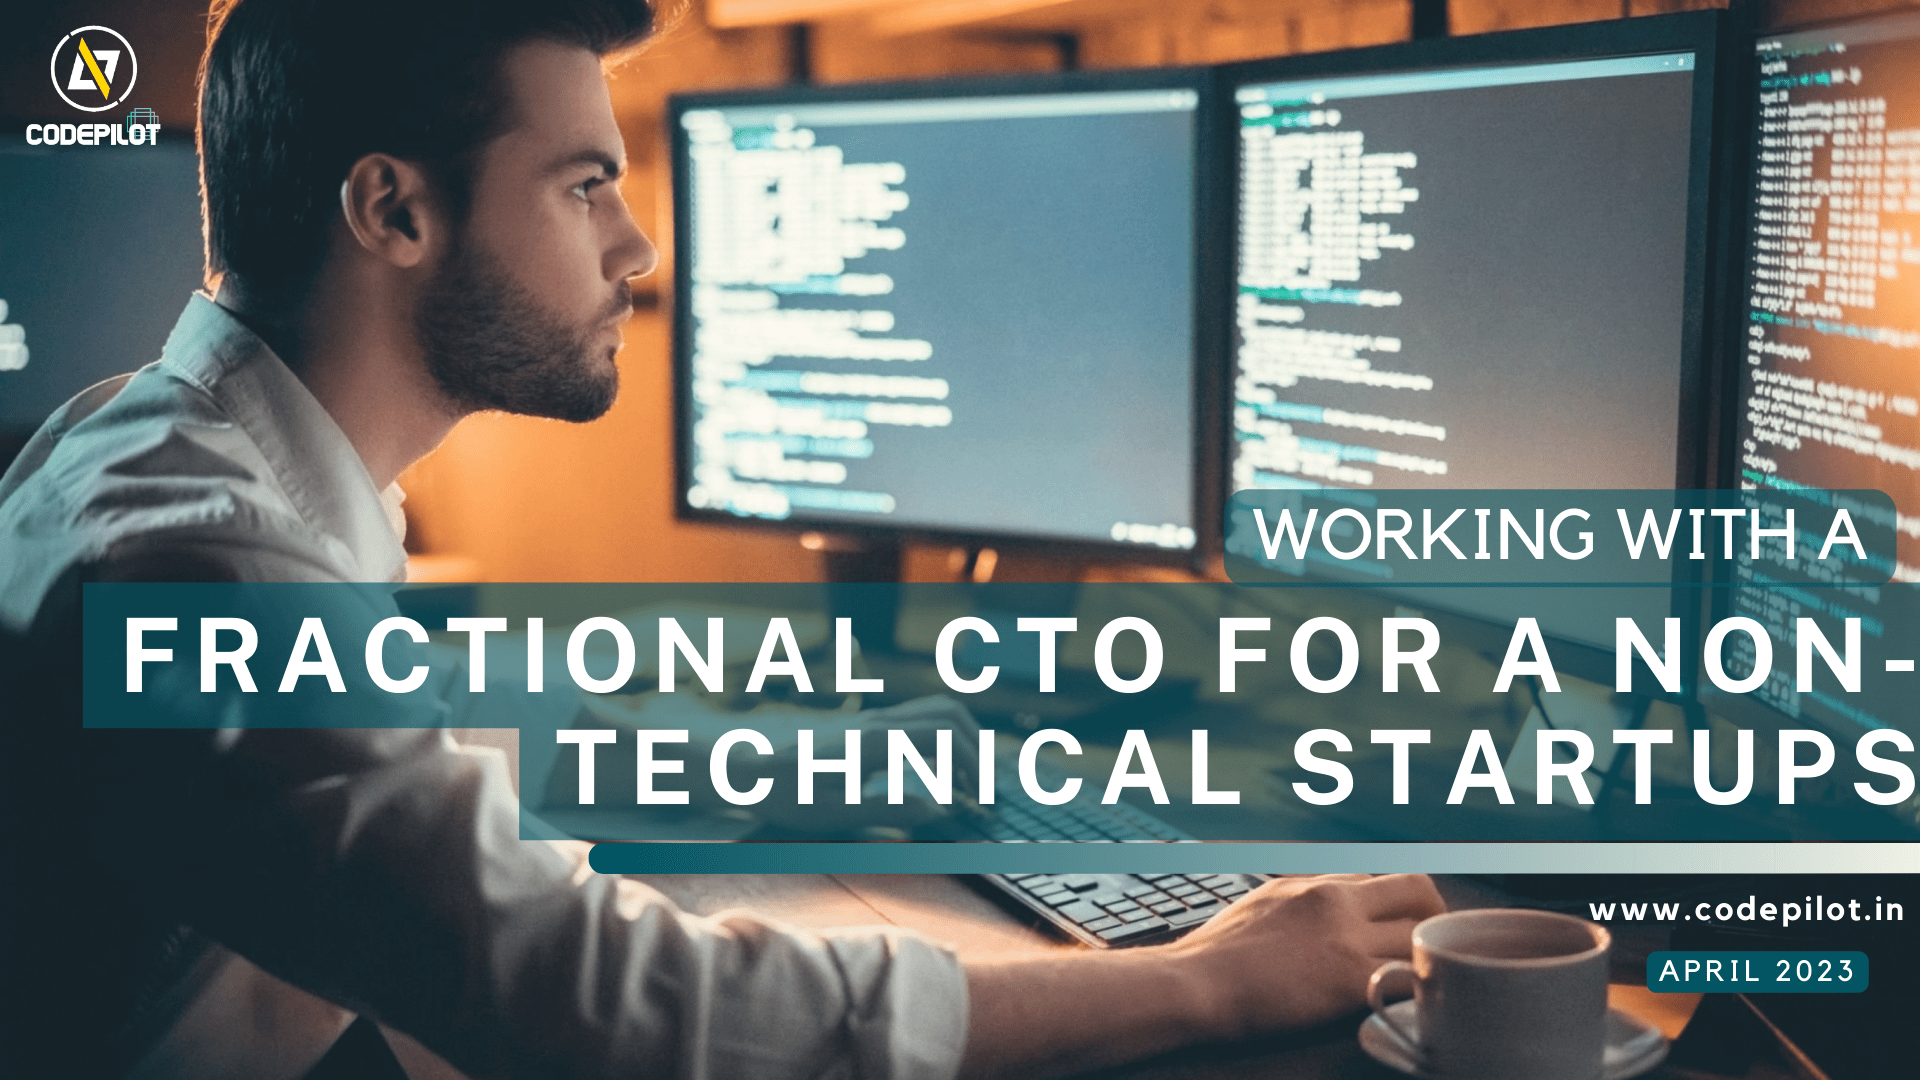 Benefits of Working with a Fractional CTO for a non-technical startups